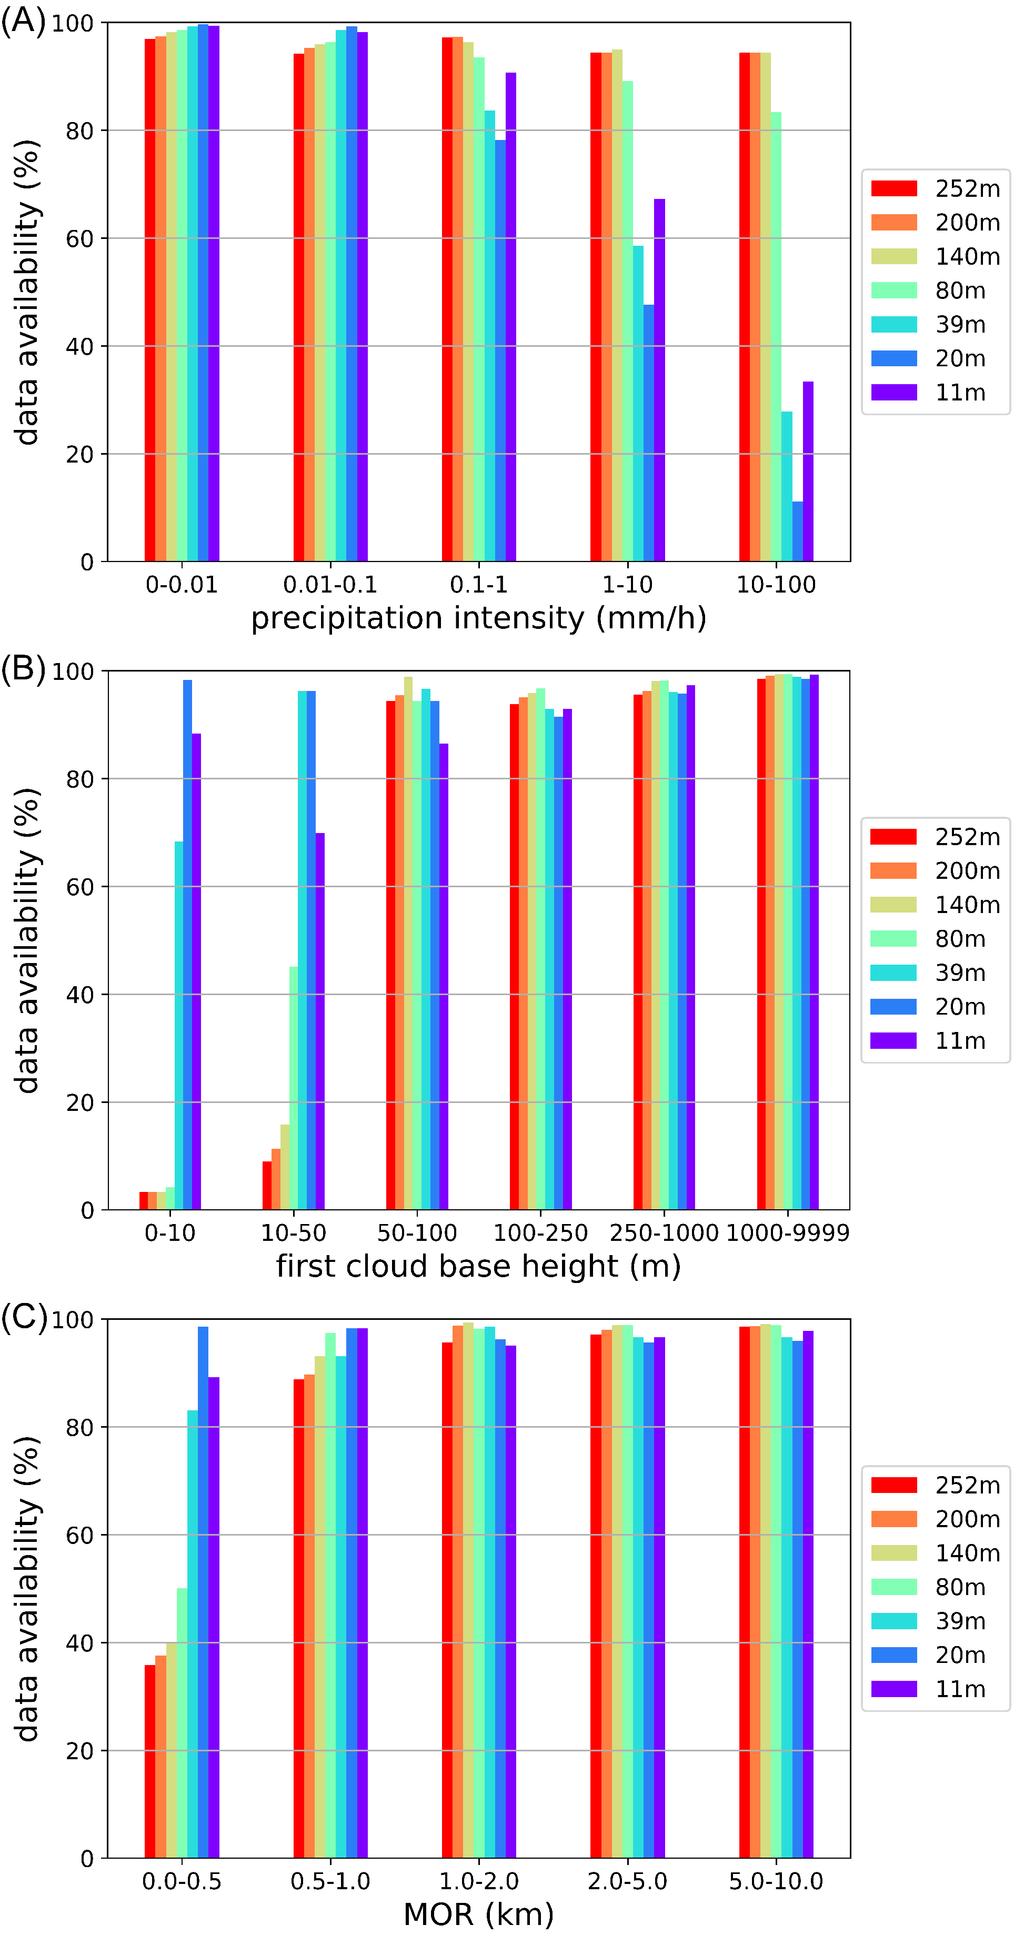 Figure 4: Data availability of the ZephIR 300 for different classes of (A) precipitation intensity, (B) first